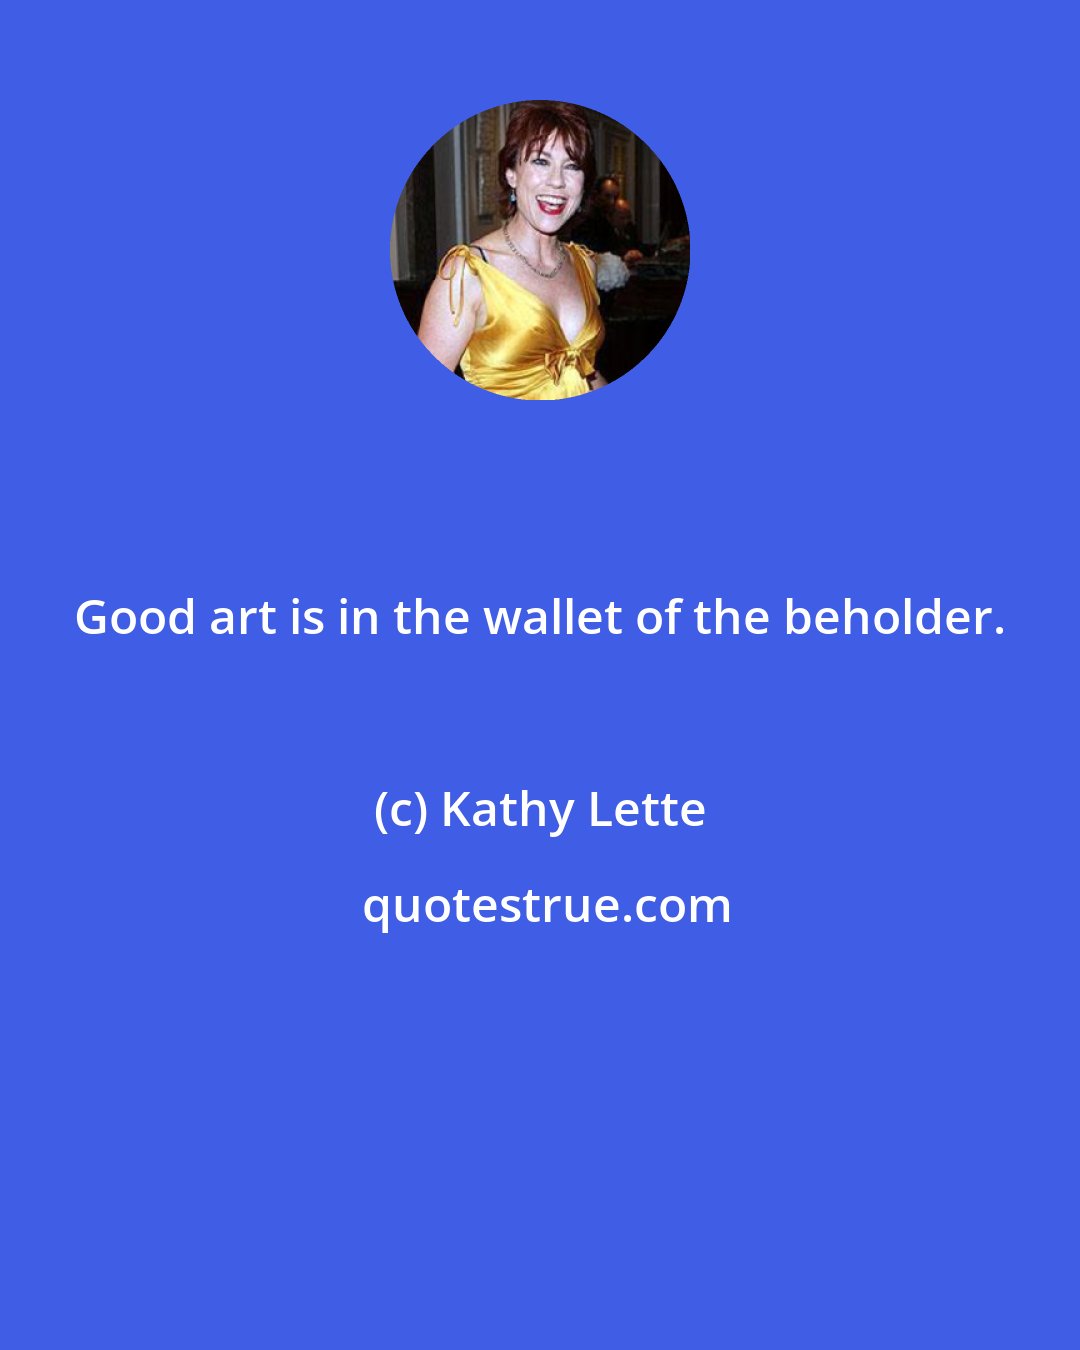 Kathy Lette: Good art is in the wallet of the beholder.